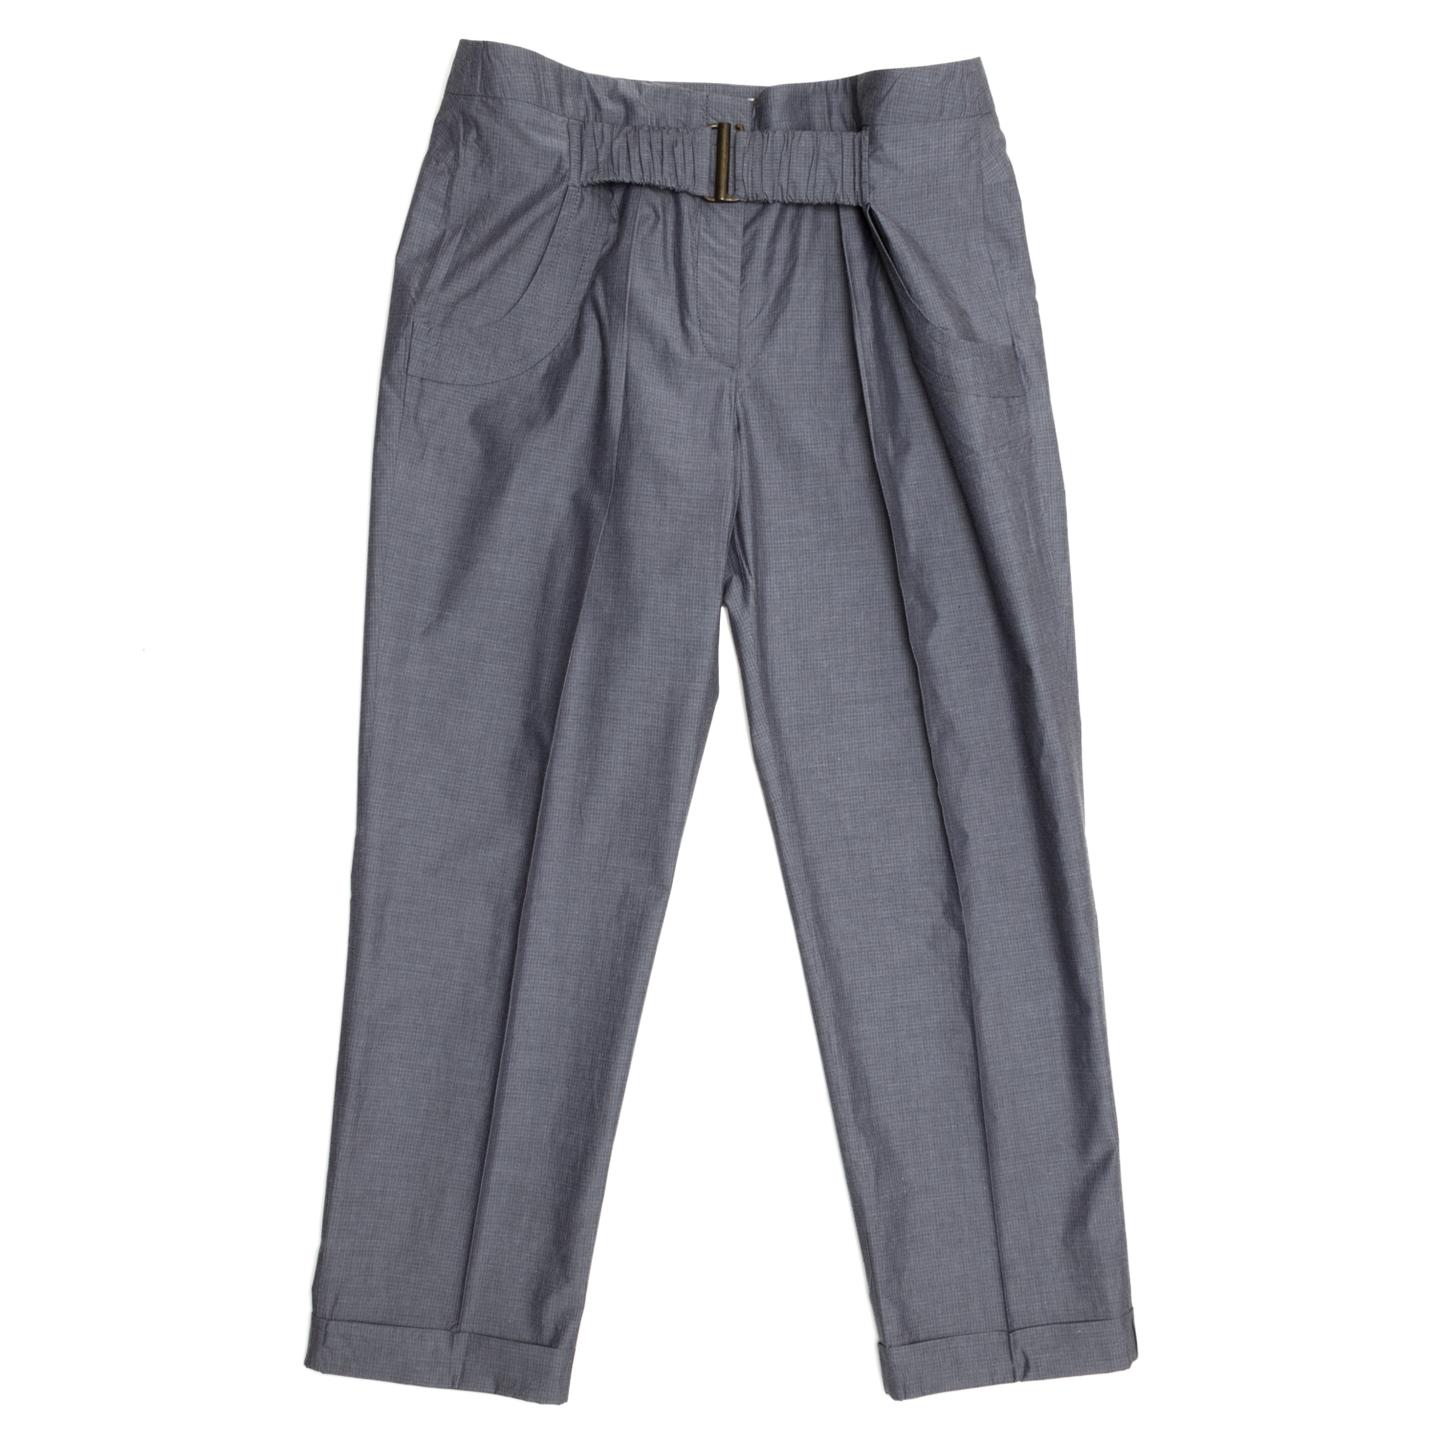 Stella McCartney tapered cotton mini graph check tonal grey trousers. Pintuck detail on front and back legs. Curved pockets with topstitching. Self-fabric elasticized fixed belt at front with metal clasp. Zip fly closure and classic turn-up